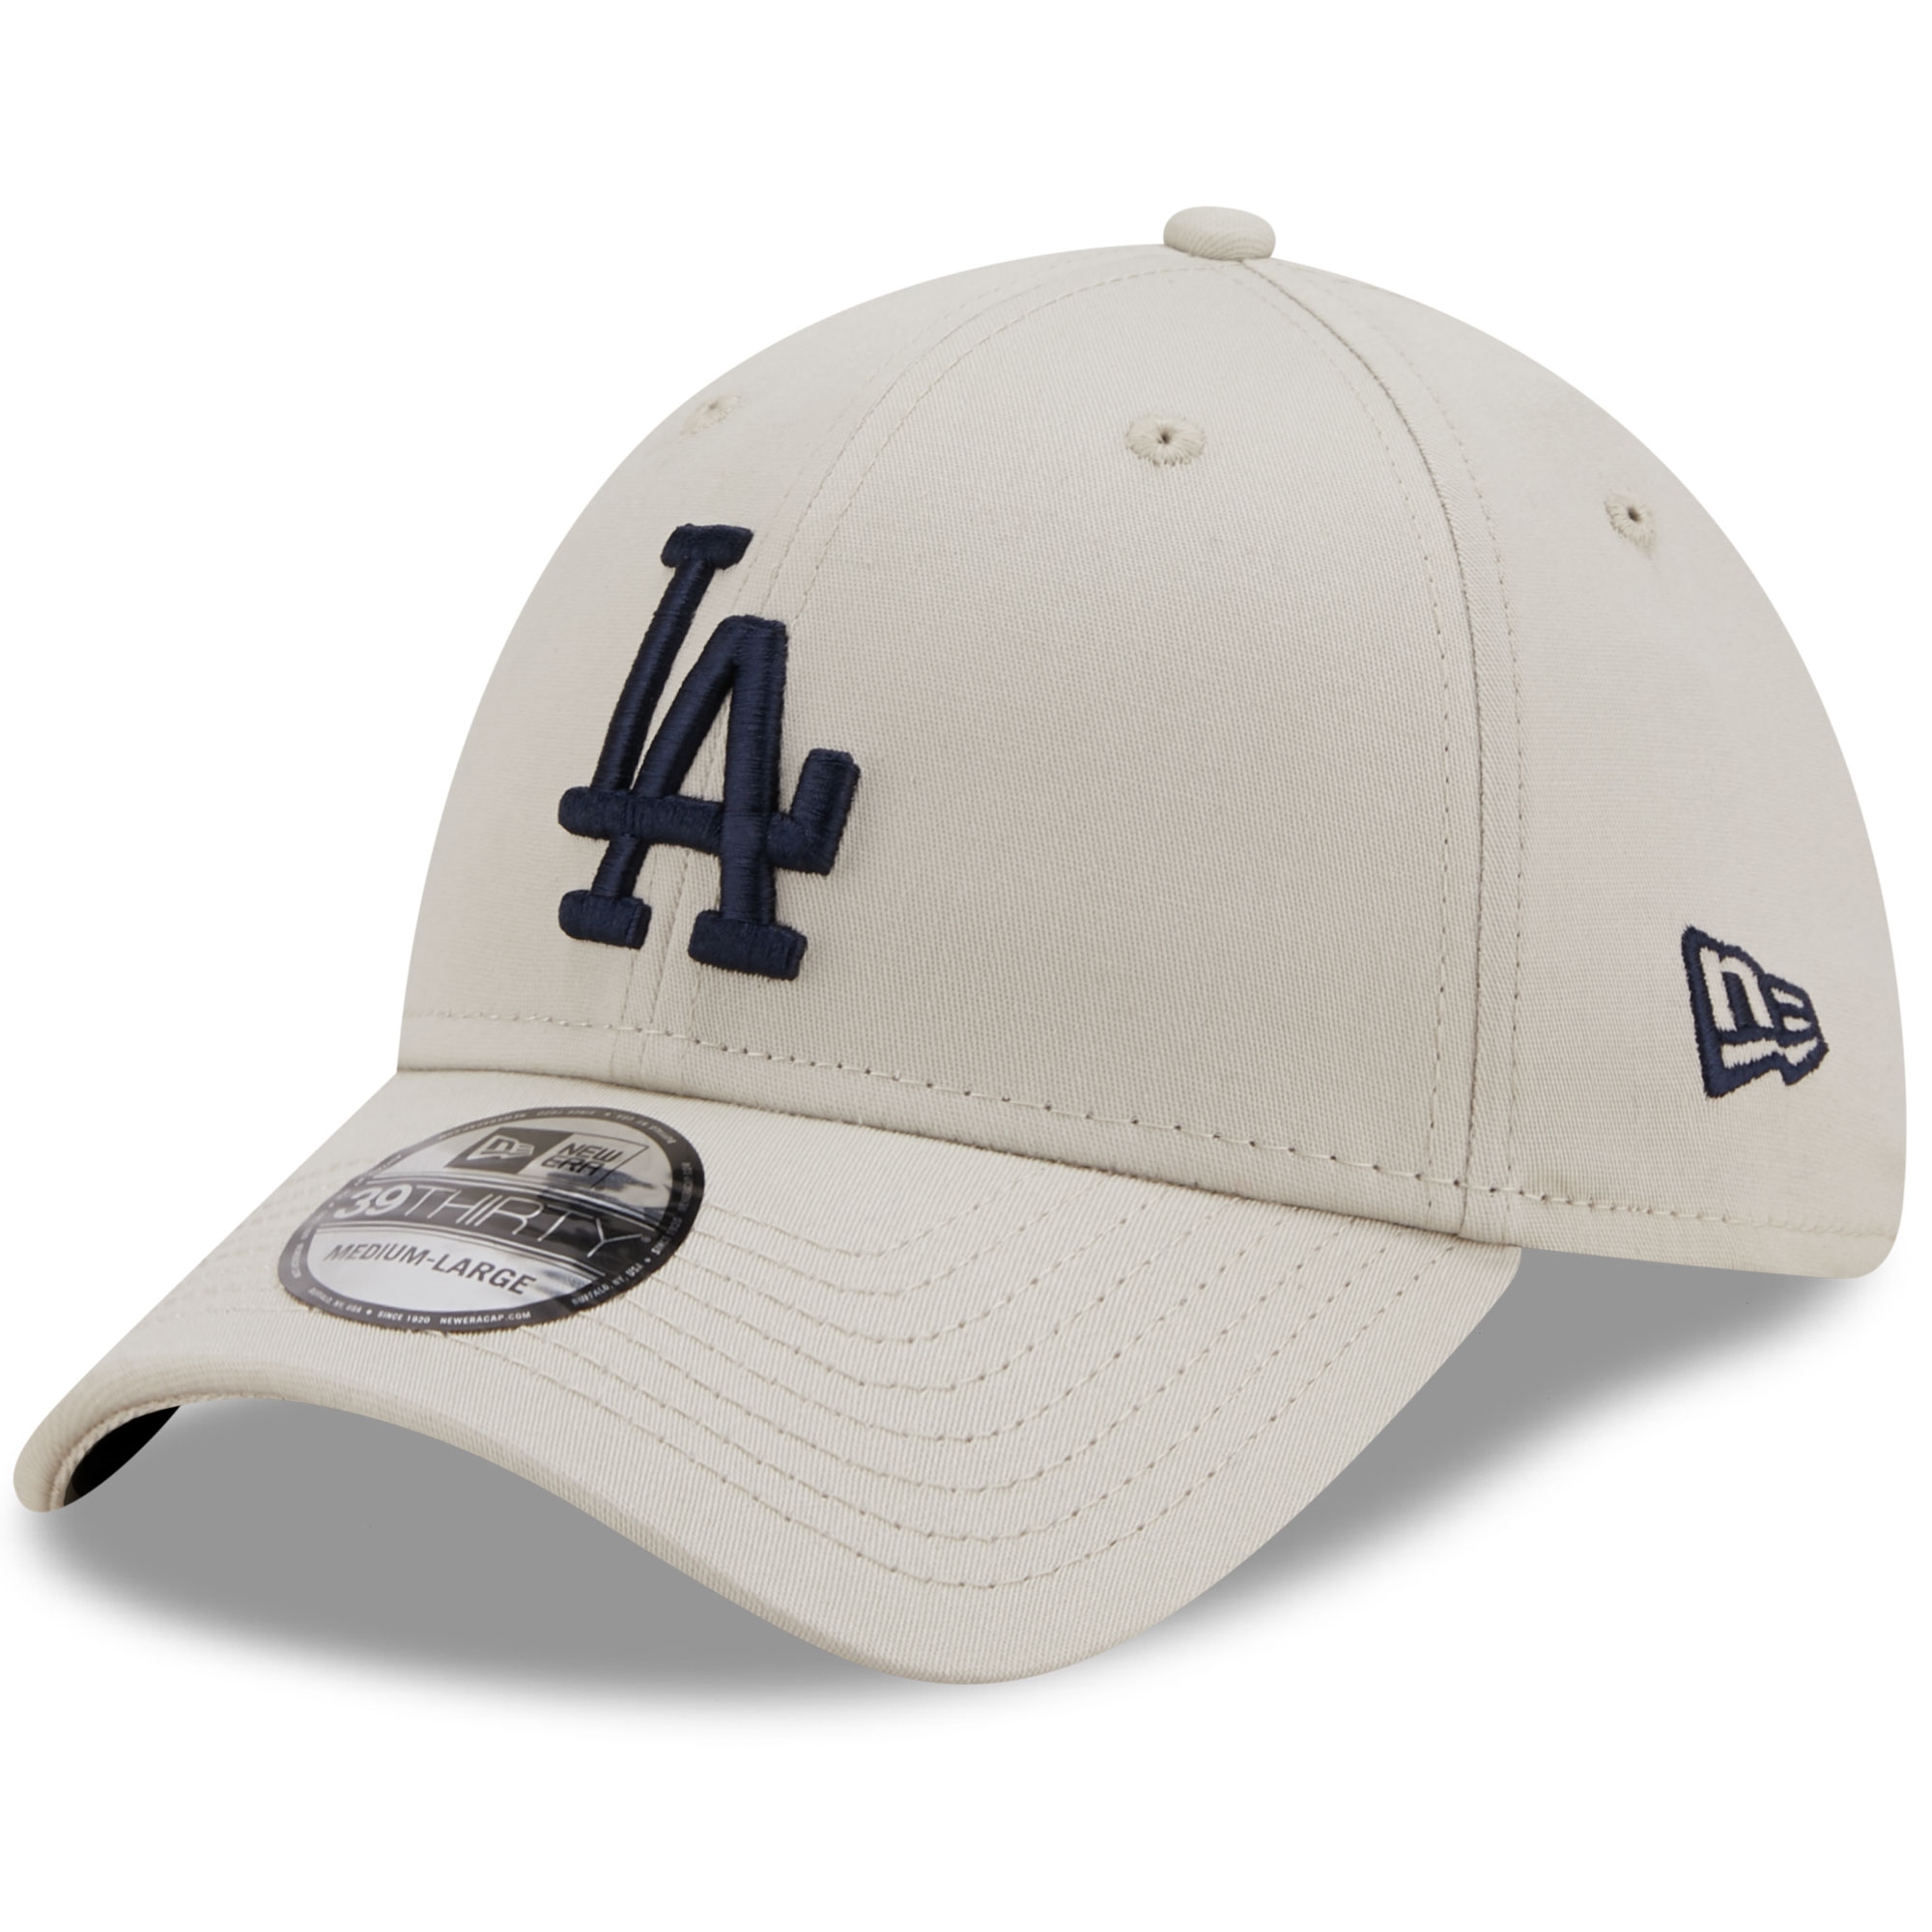 New Era 39thirty Cap New York Yankees Los Angeles Dodgers Stretch Fit Kappe